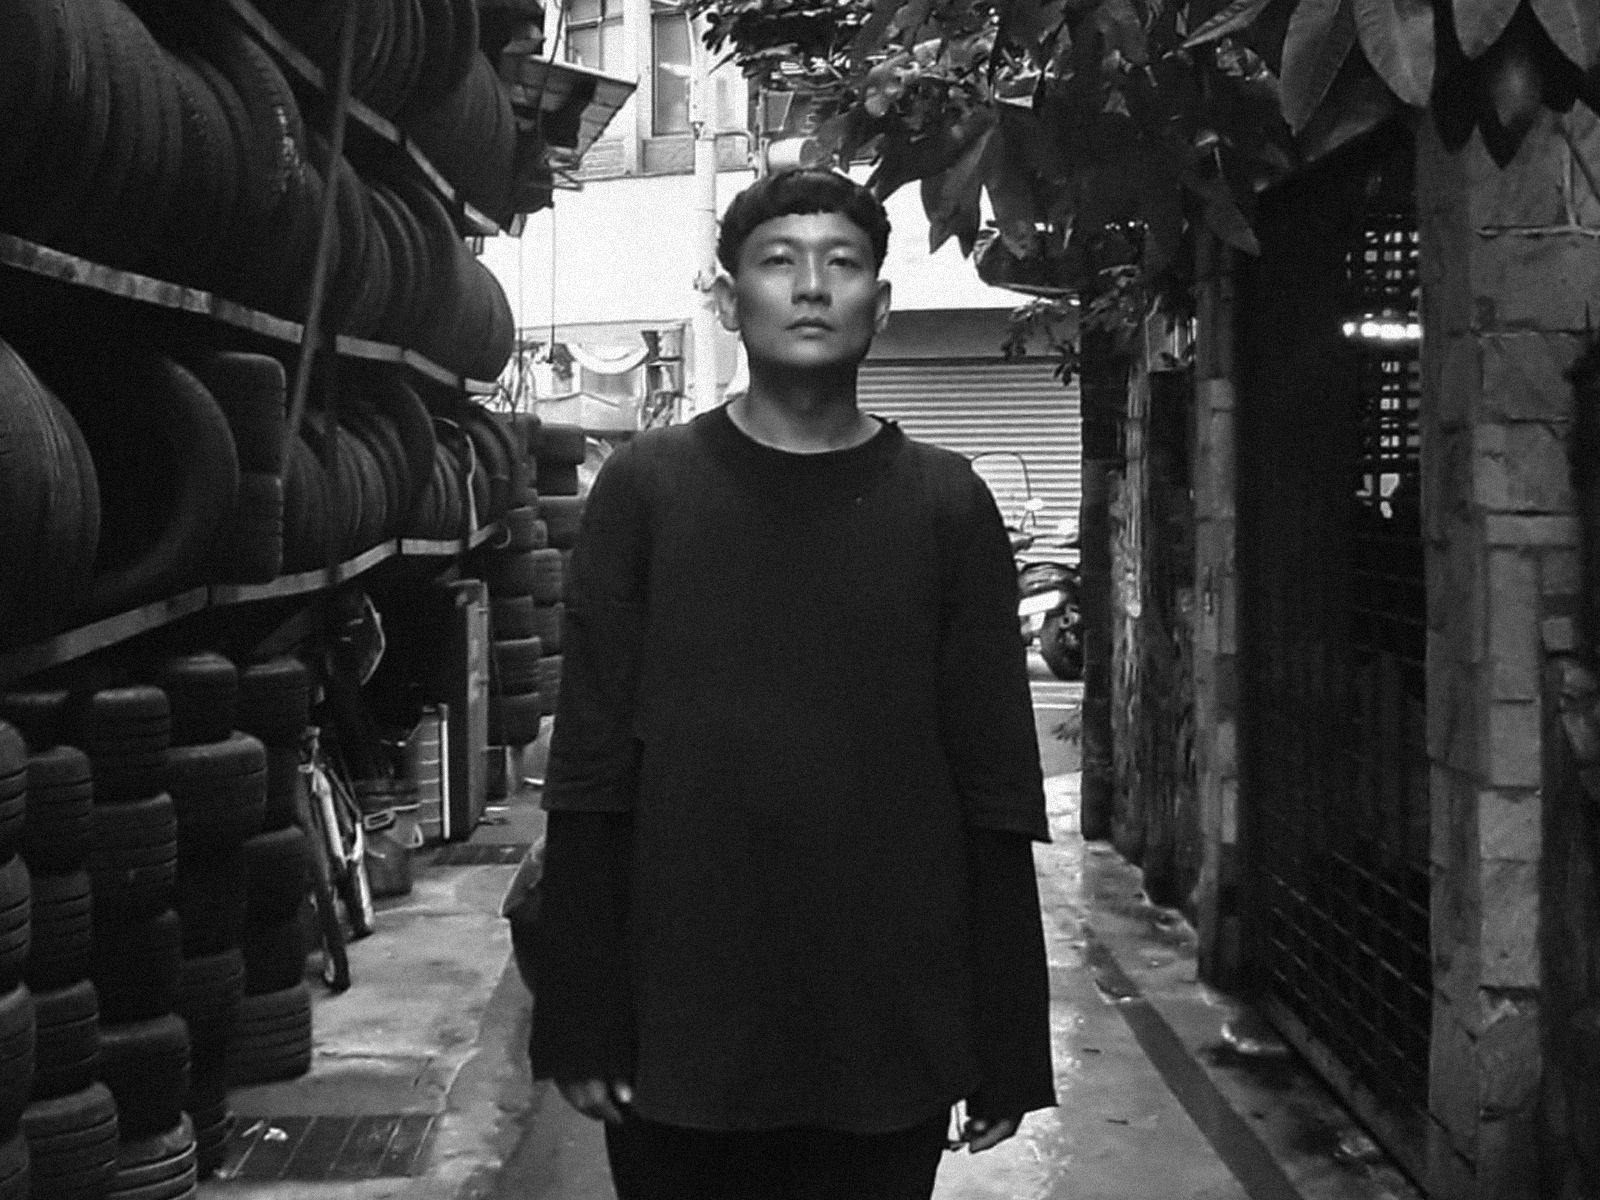 Kasimyn standing in the street, hundreds of tyres are stacked up to their left.